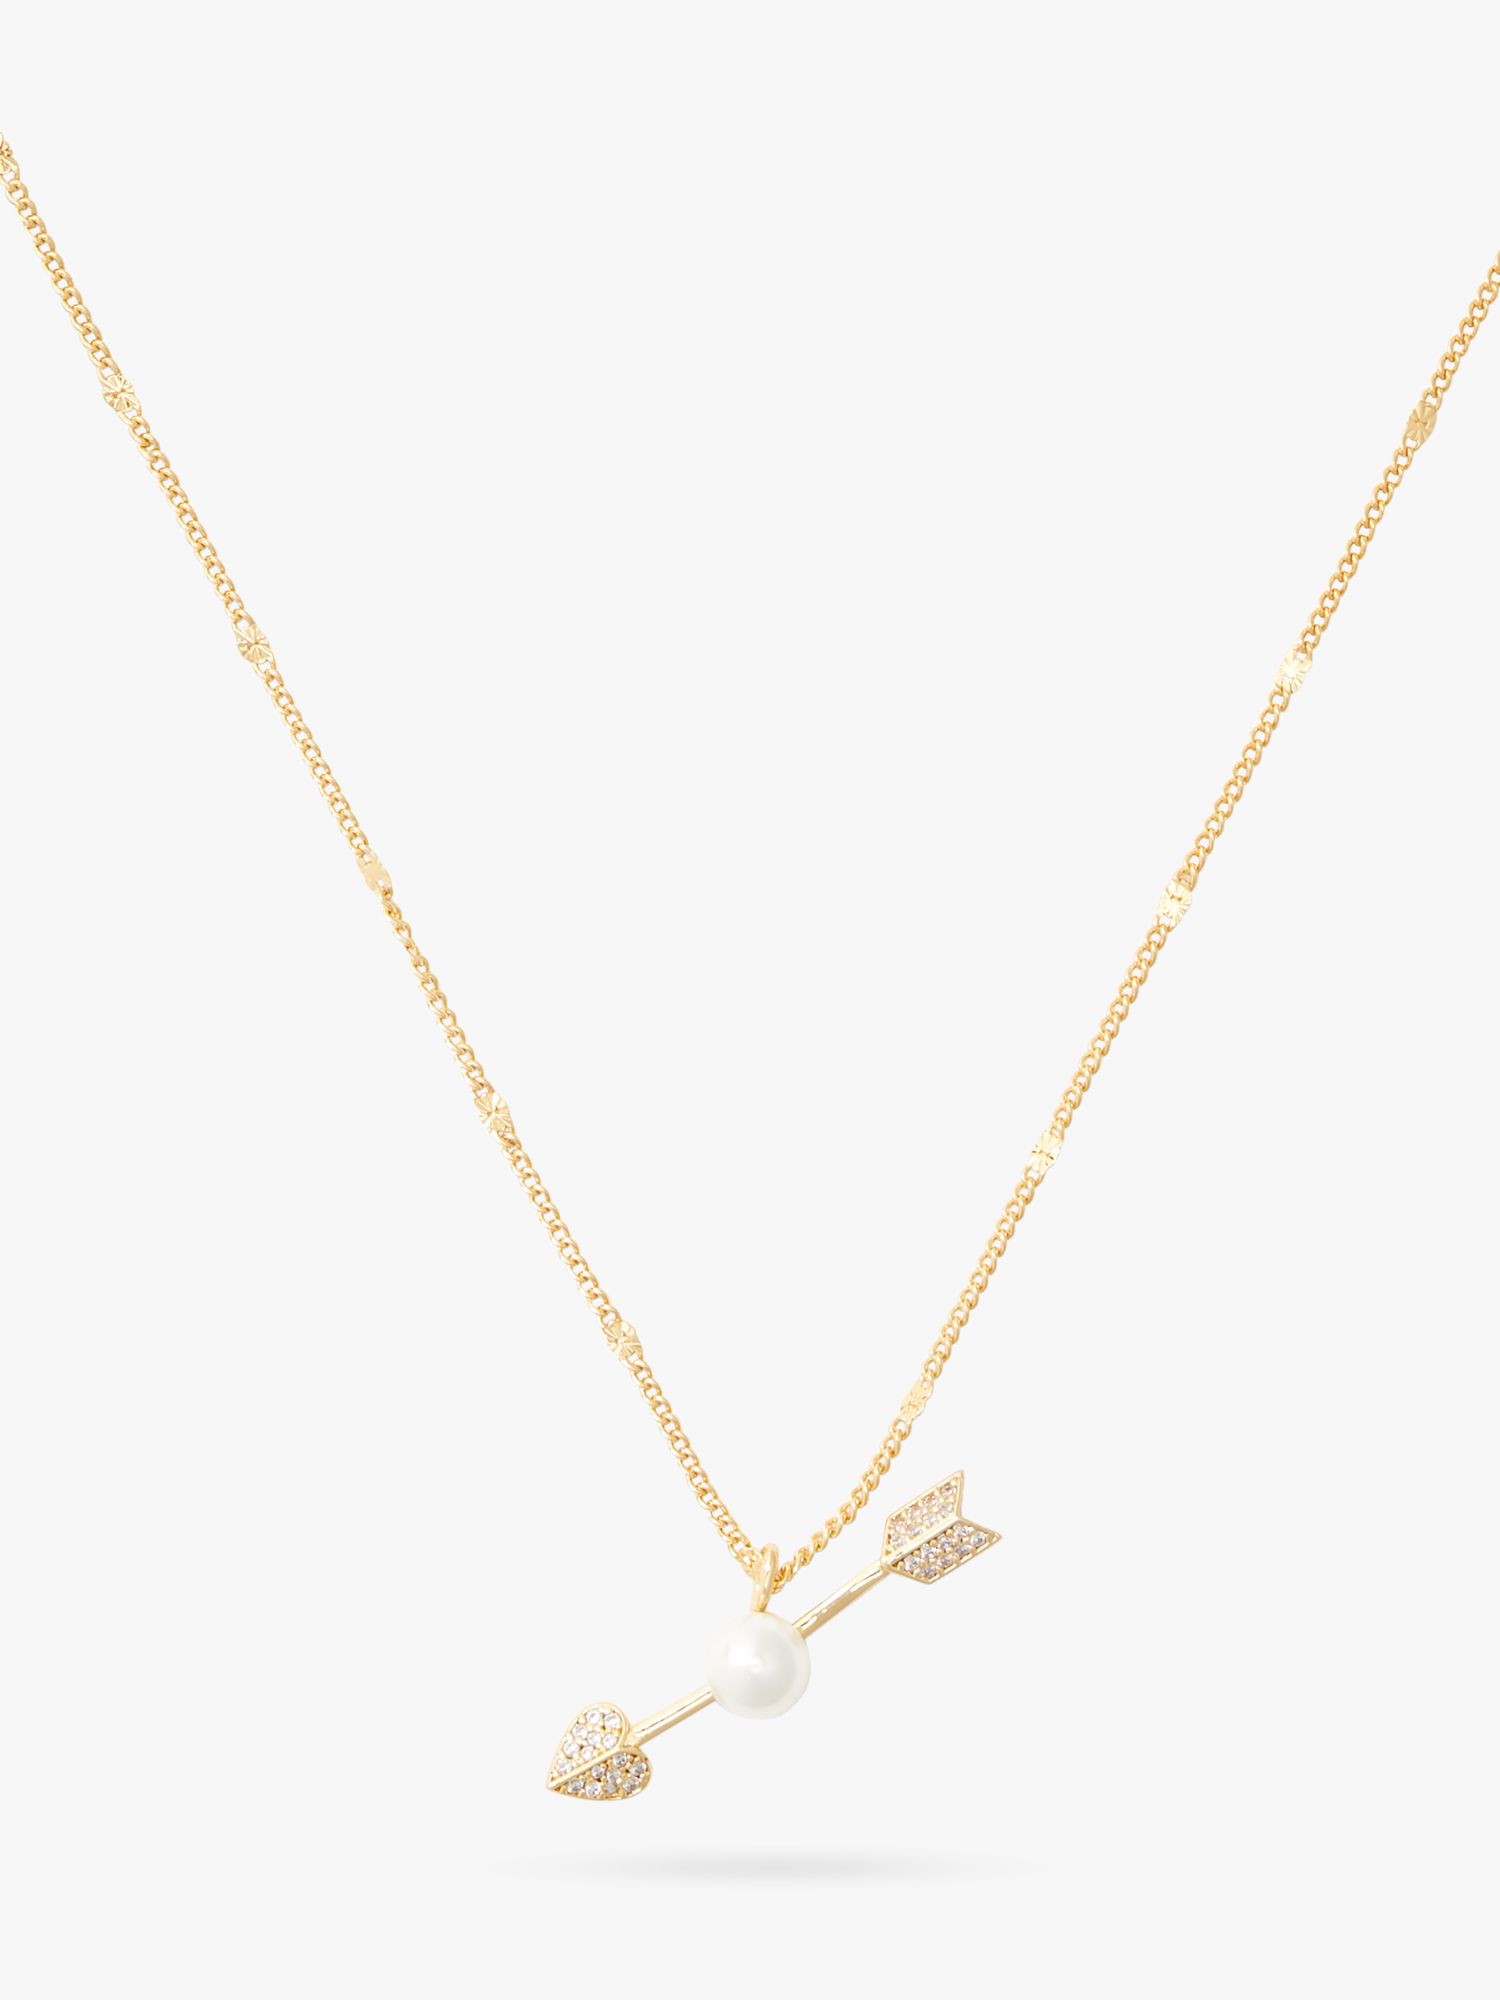 kate spade new york Cubic Zirconia & Faux Pearl Love Arrow Pendant Necklace, Gold